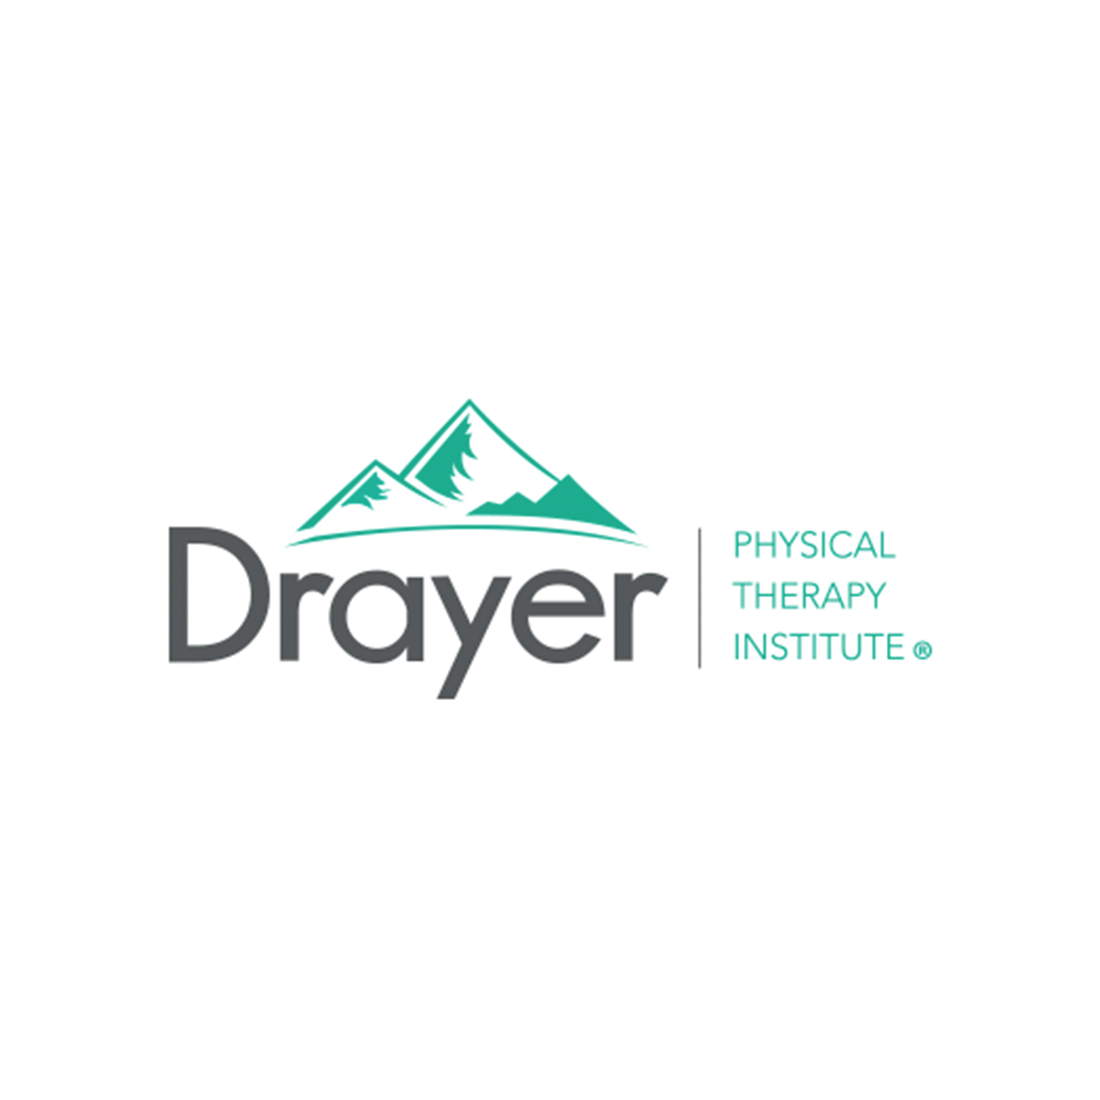 Drayer Physical Therapy Institute, LLC